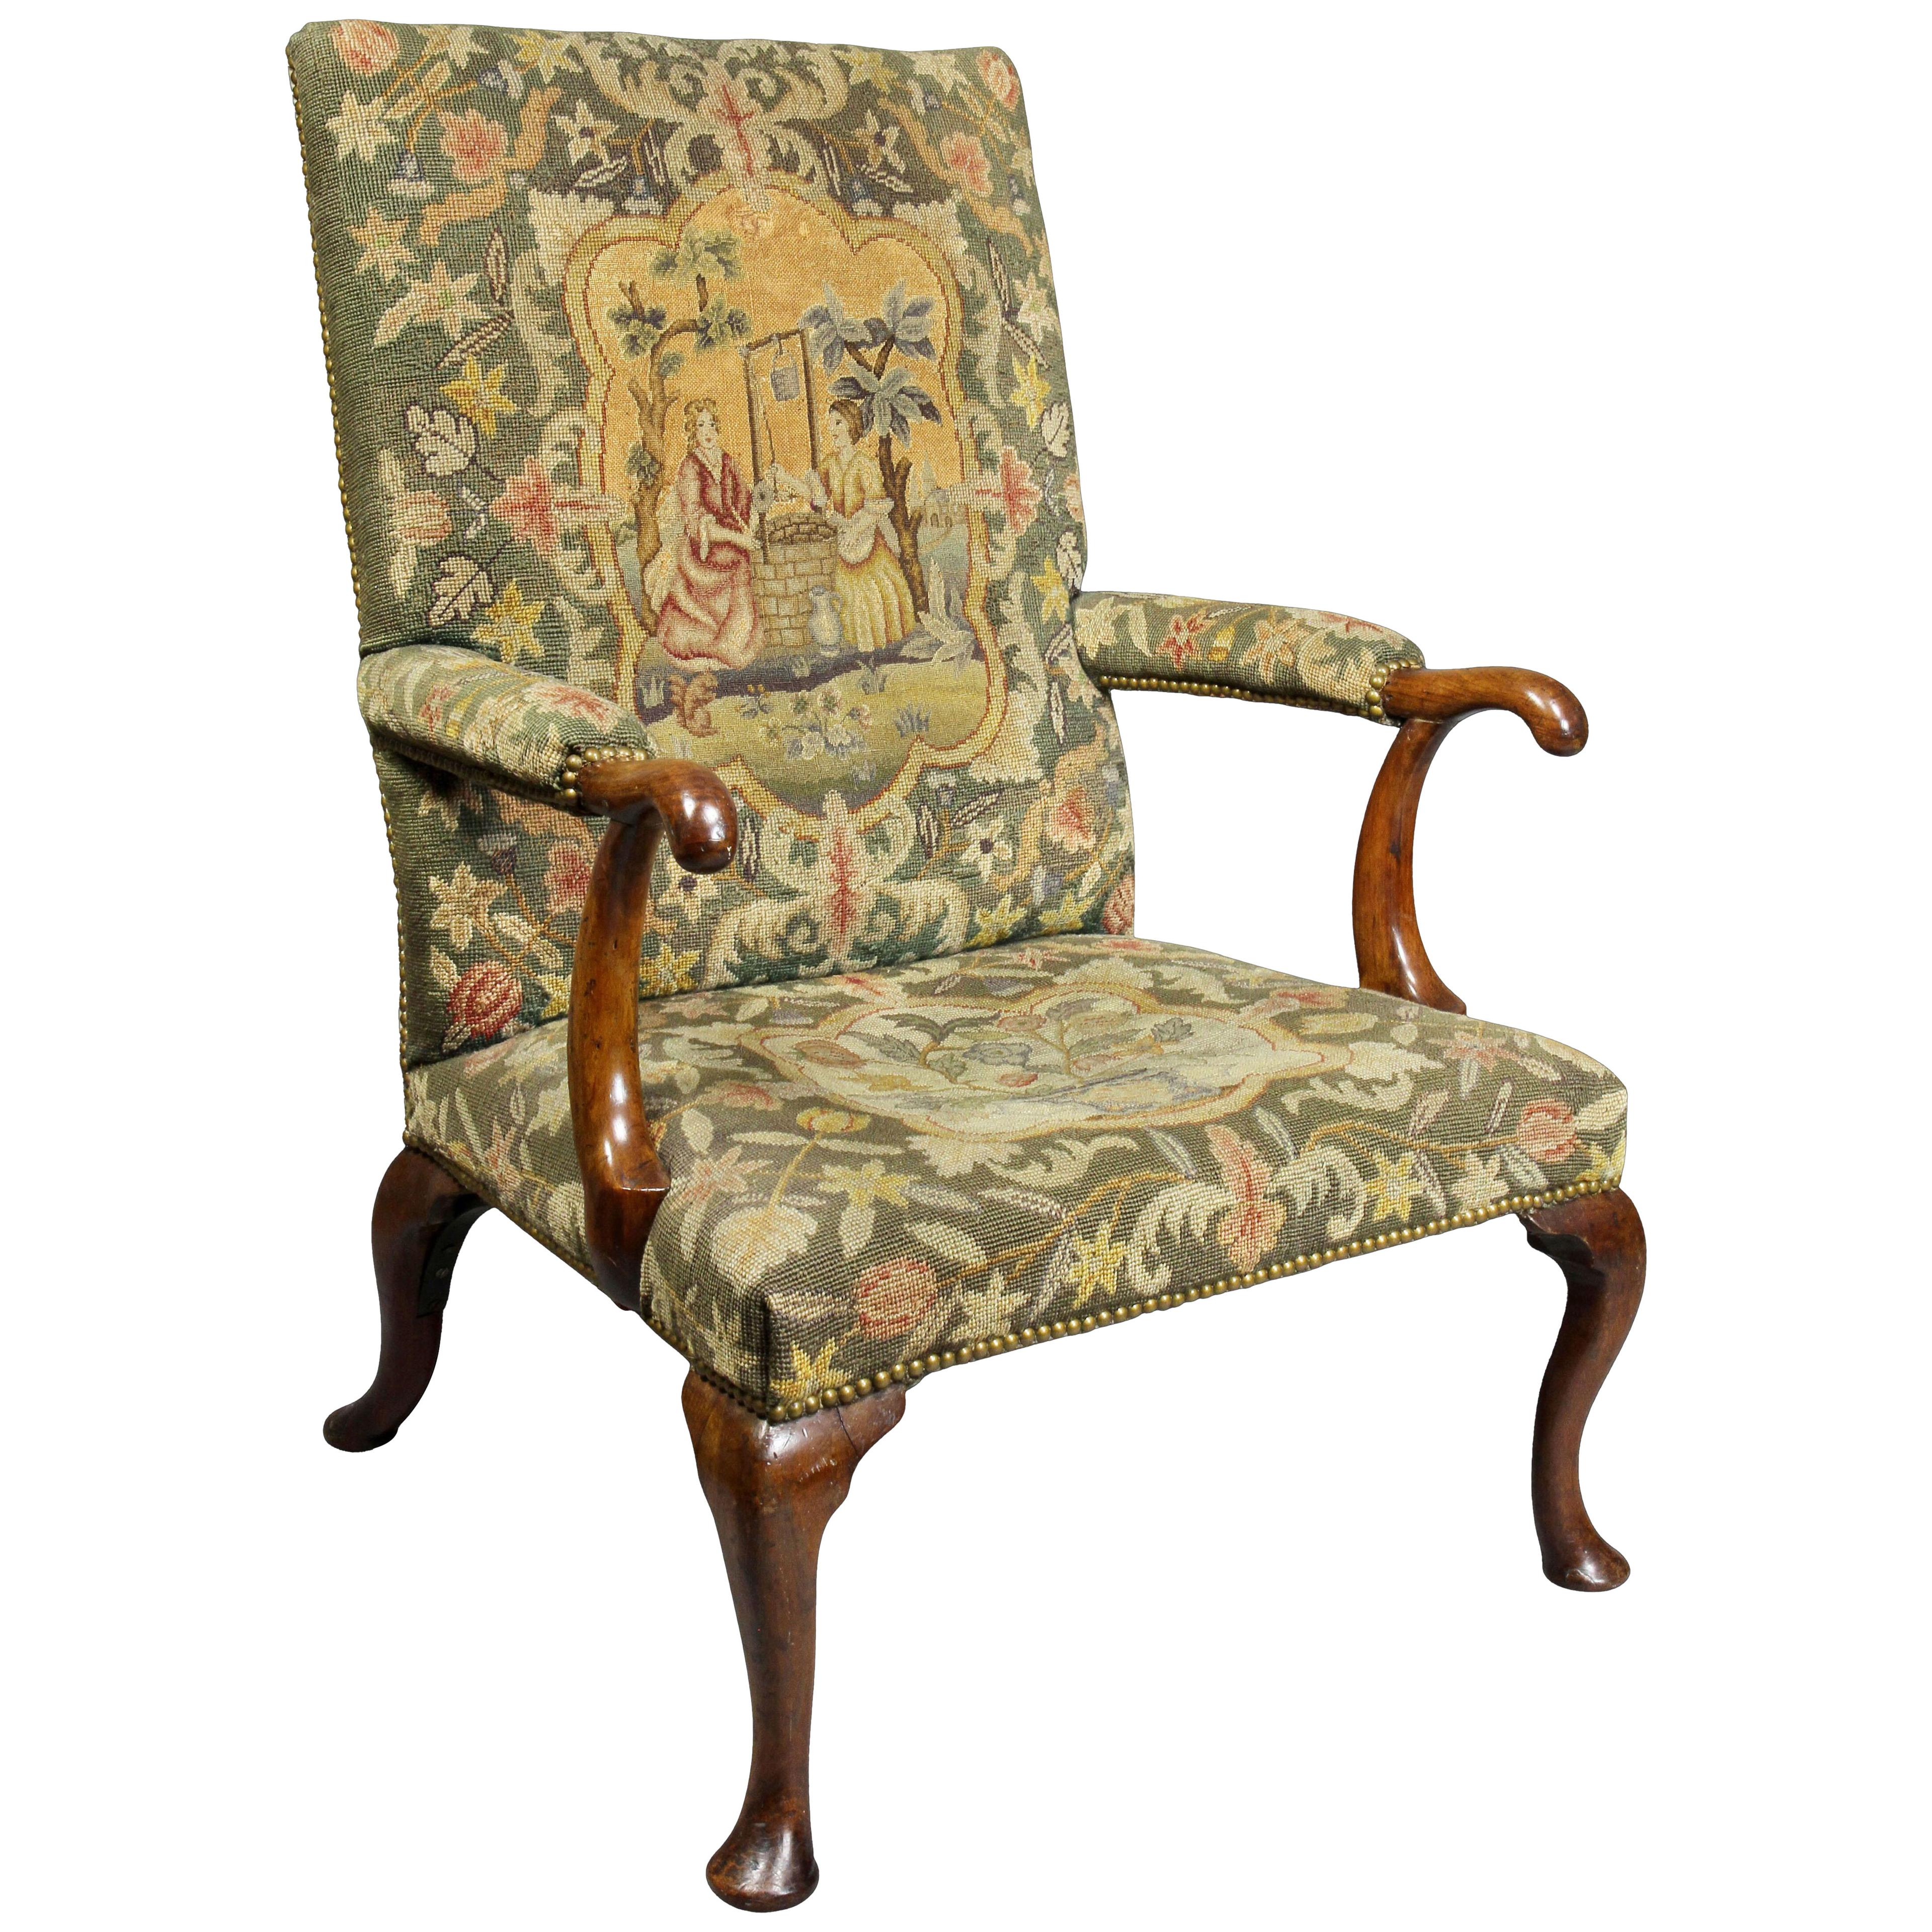 Early 18th Century Queen Anne Walnut and Needlepoint Upholstered Armchair